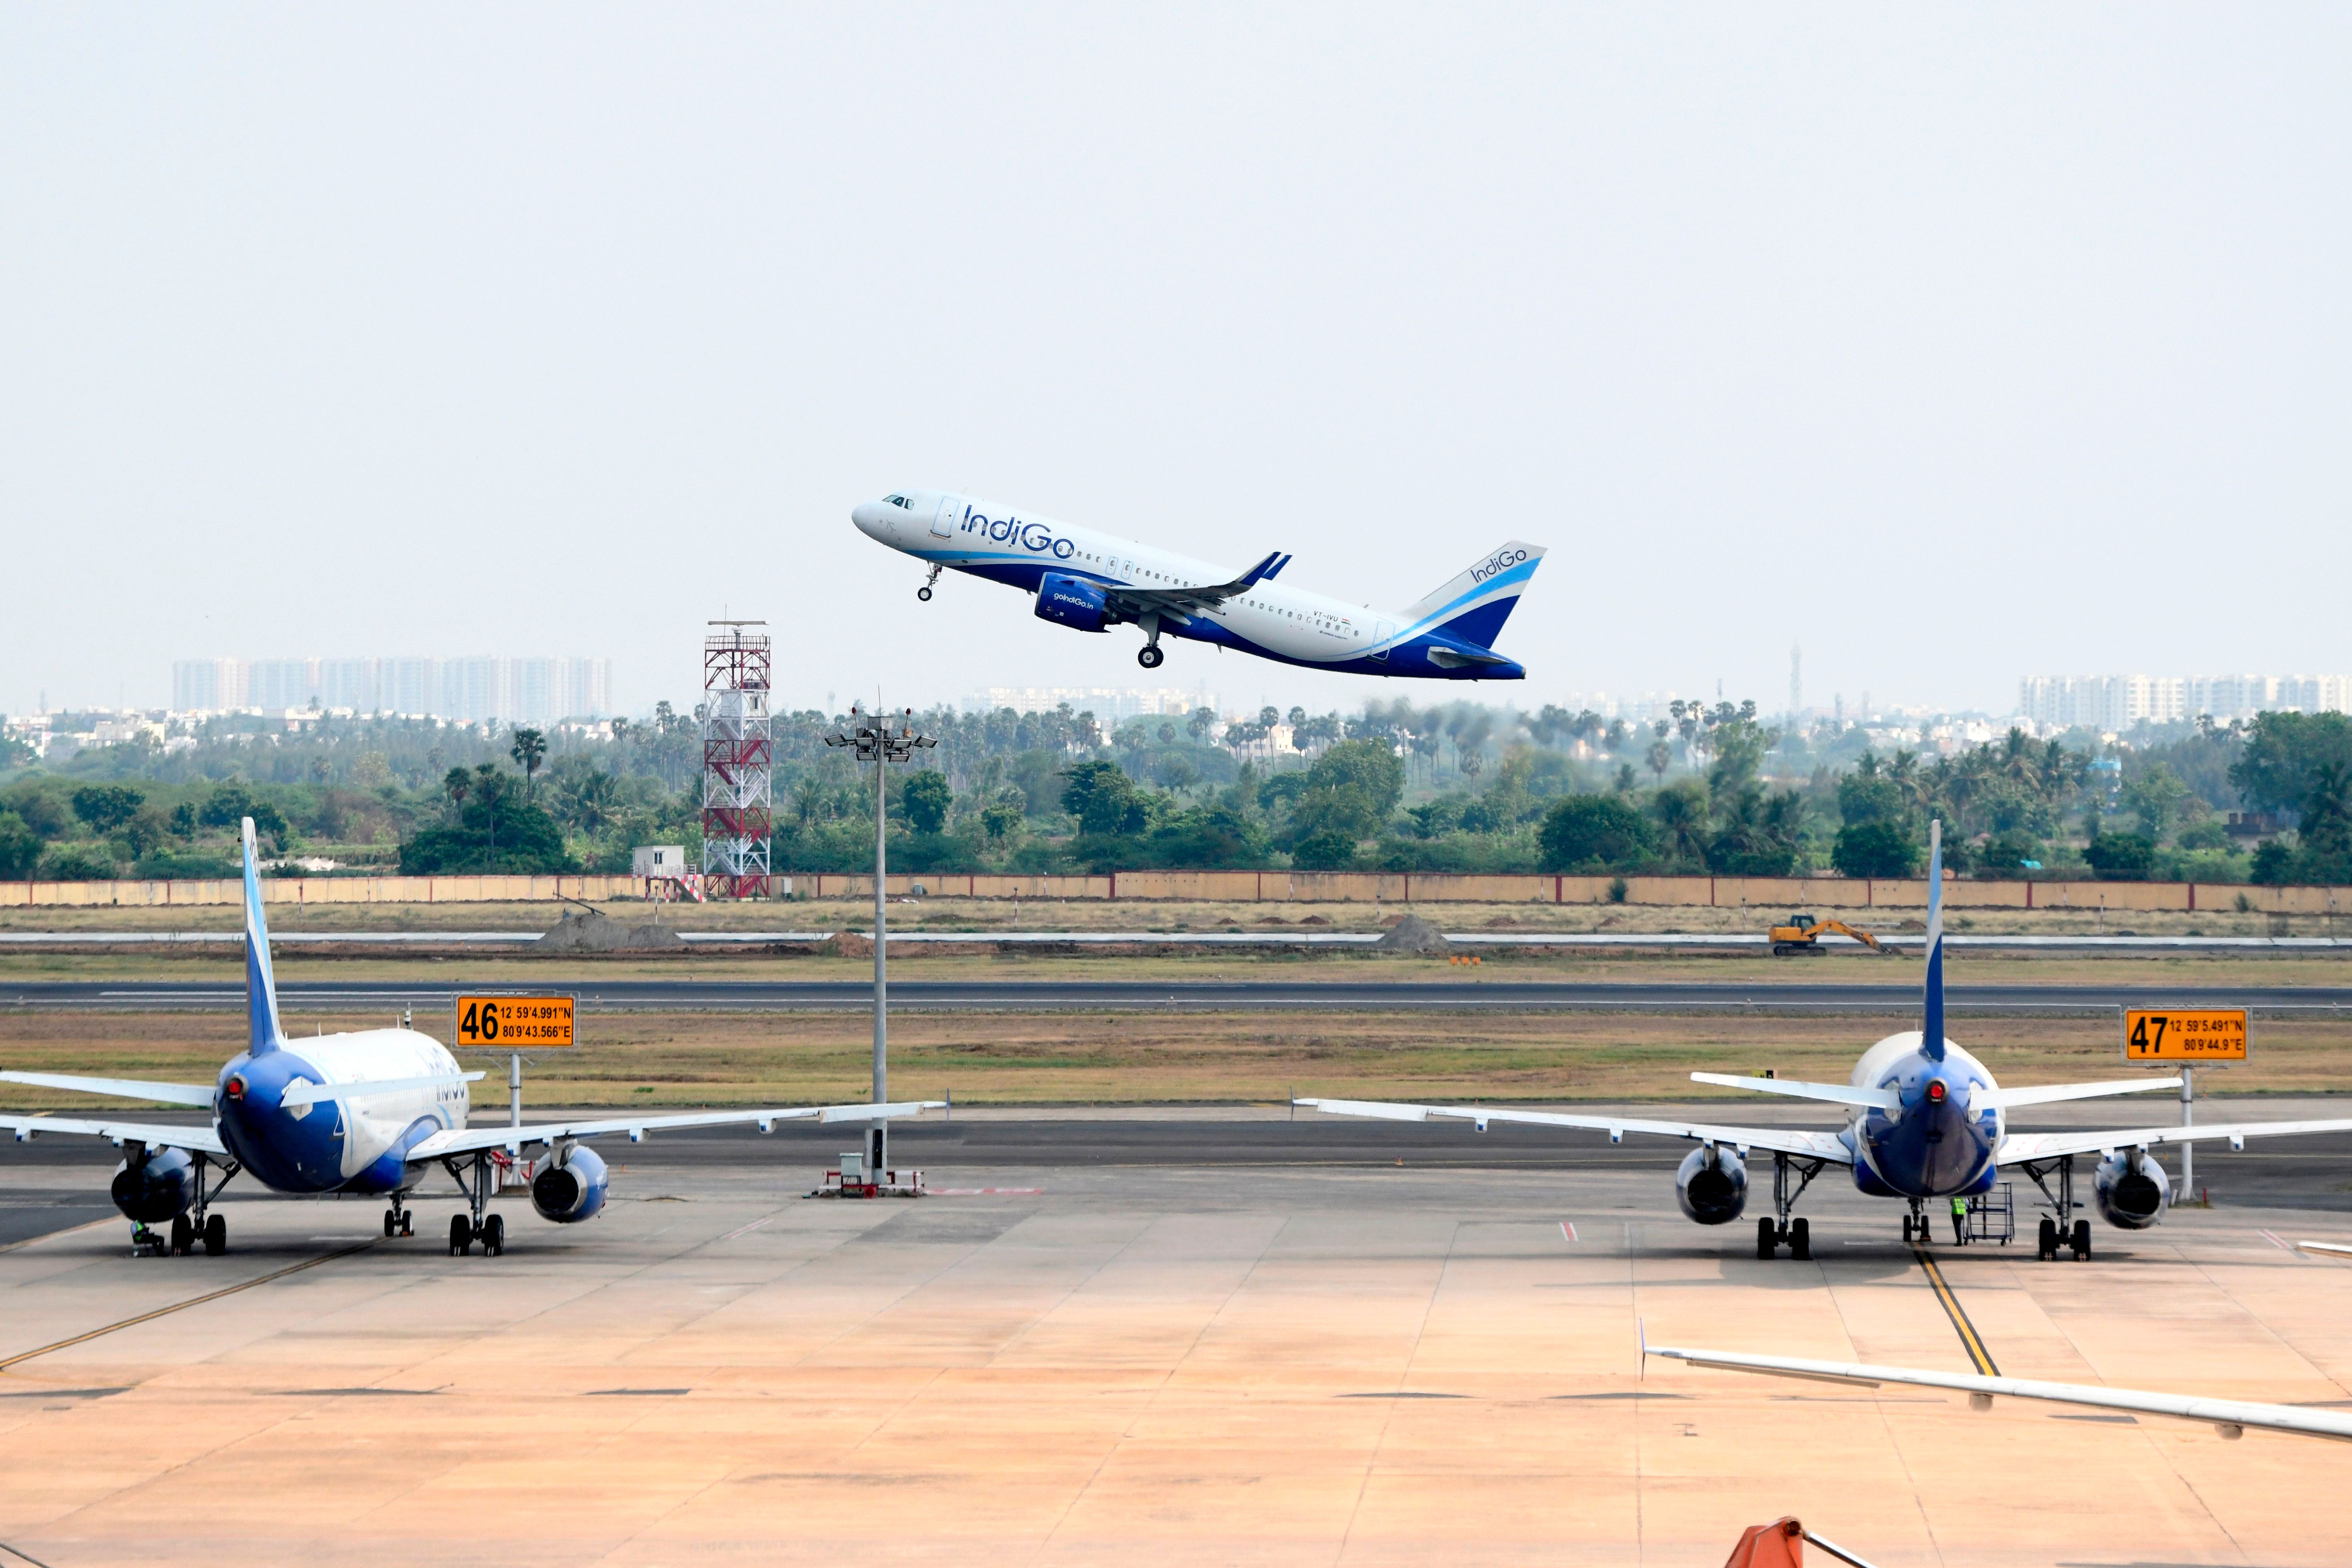 An IndiGo Airbus A320 takes off from Chennai Airport in India